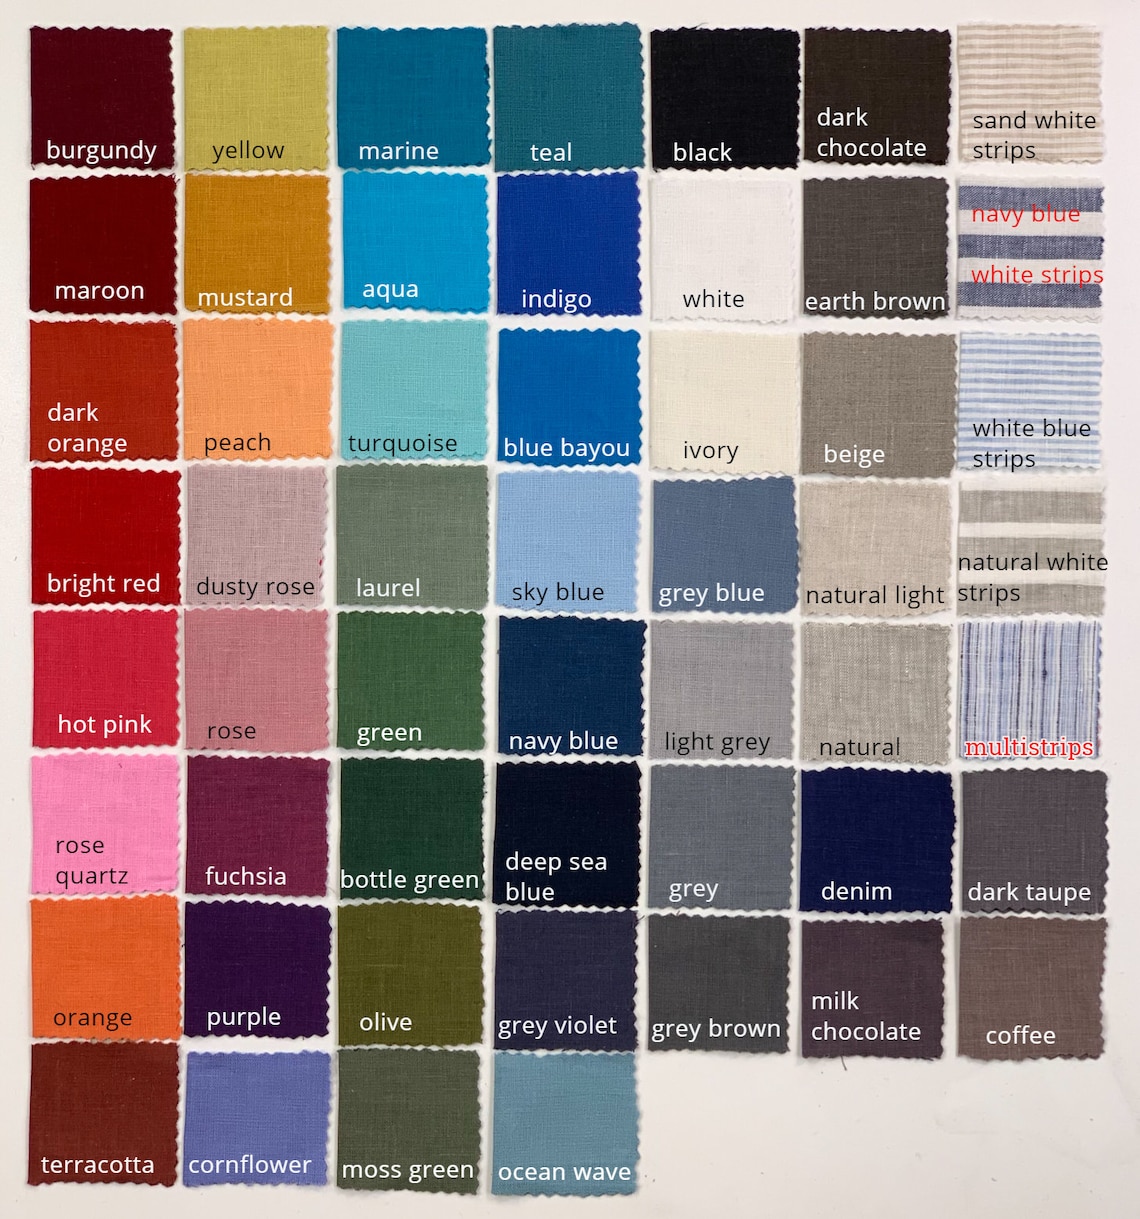 Linen Fabric Swatches / Fabric Sample: up to 15 COLORS - Etsy